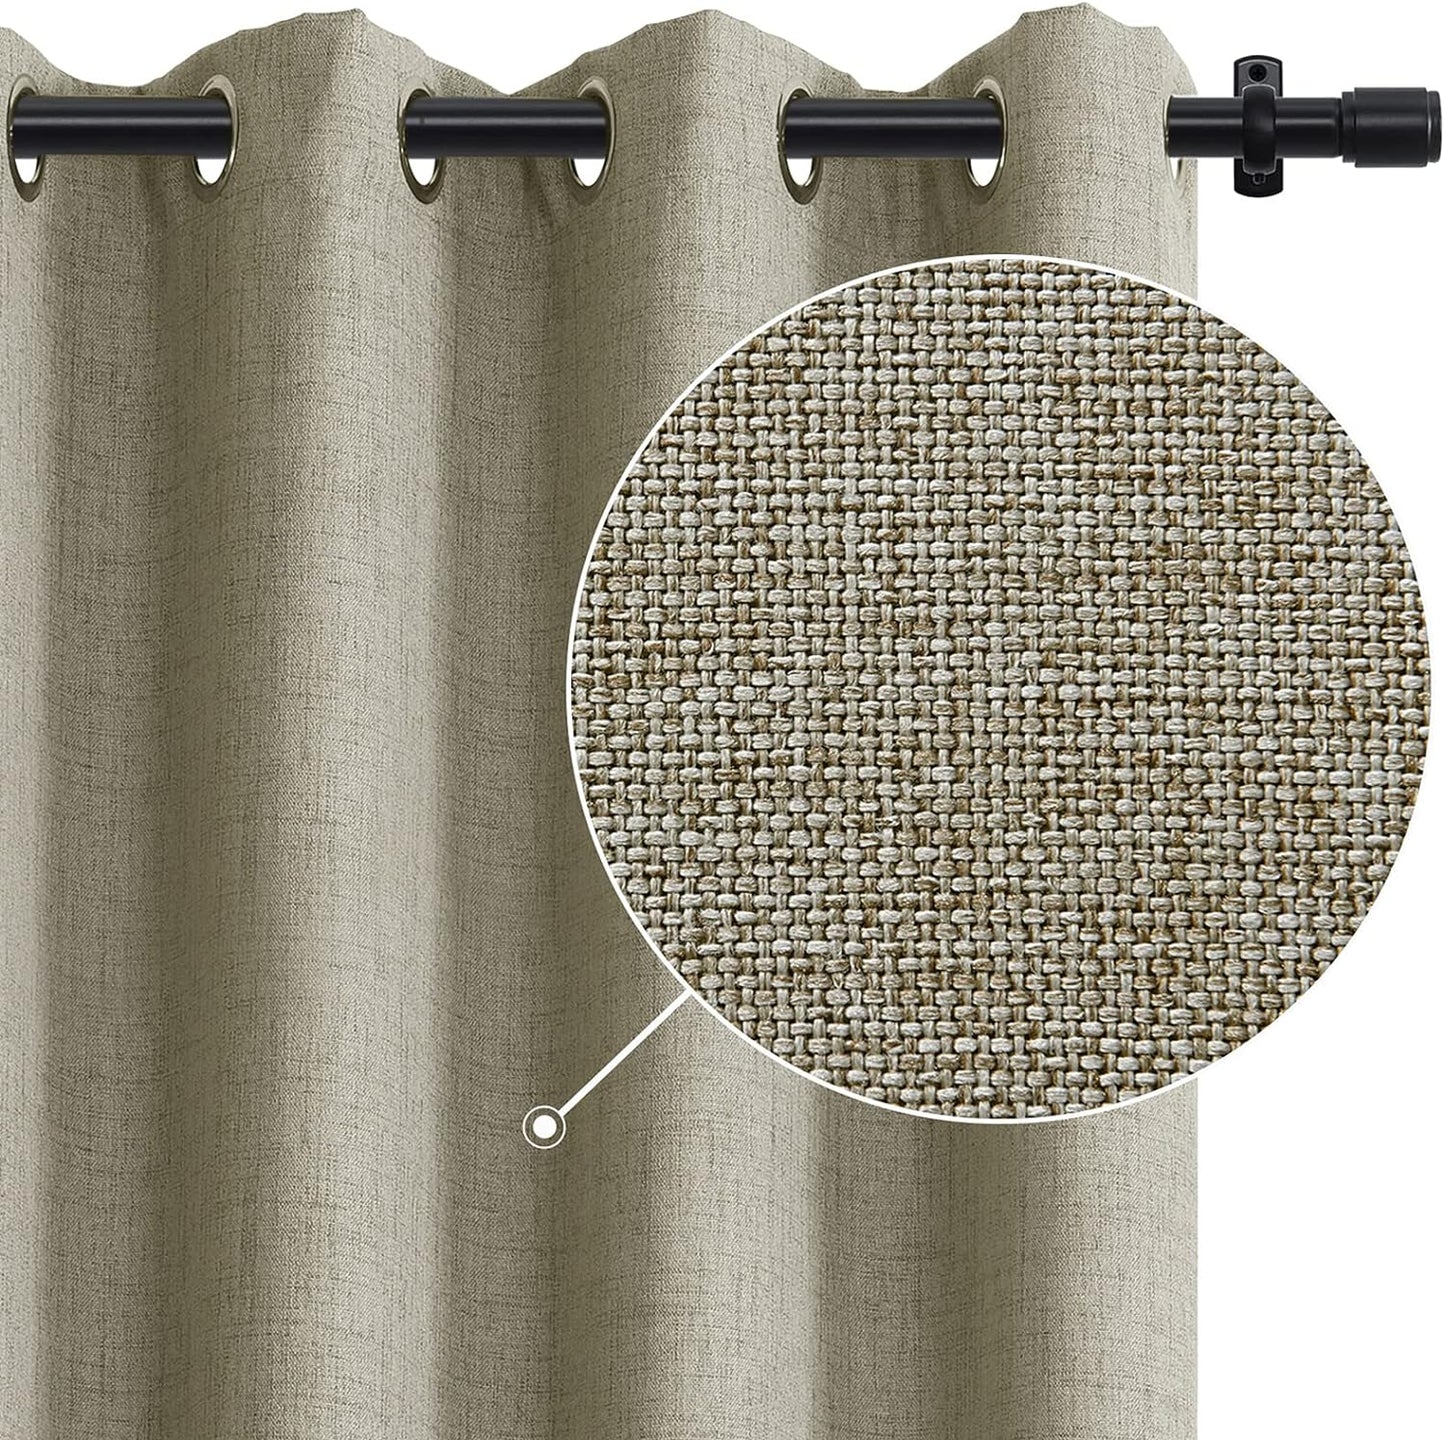 Rose Home Fashion Linen Blackout Curtains 84 Inch Length 2 Panels Set, 100% Black Out Curtains for Bedroom Windows 84 with Blackout Liner, Living Room Curtains & Drapes - (50X84 Beige)  Rose Home Fashion Natural W50 X L108 